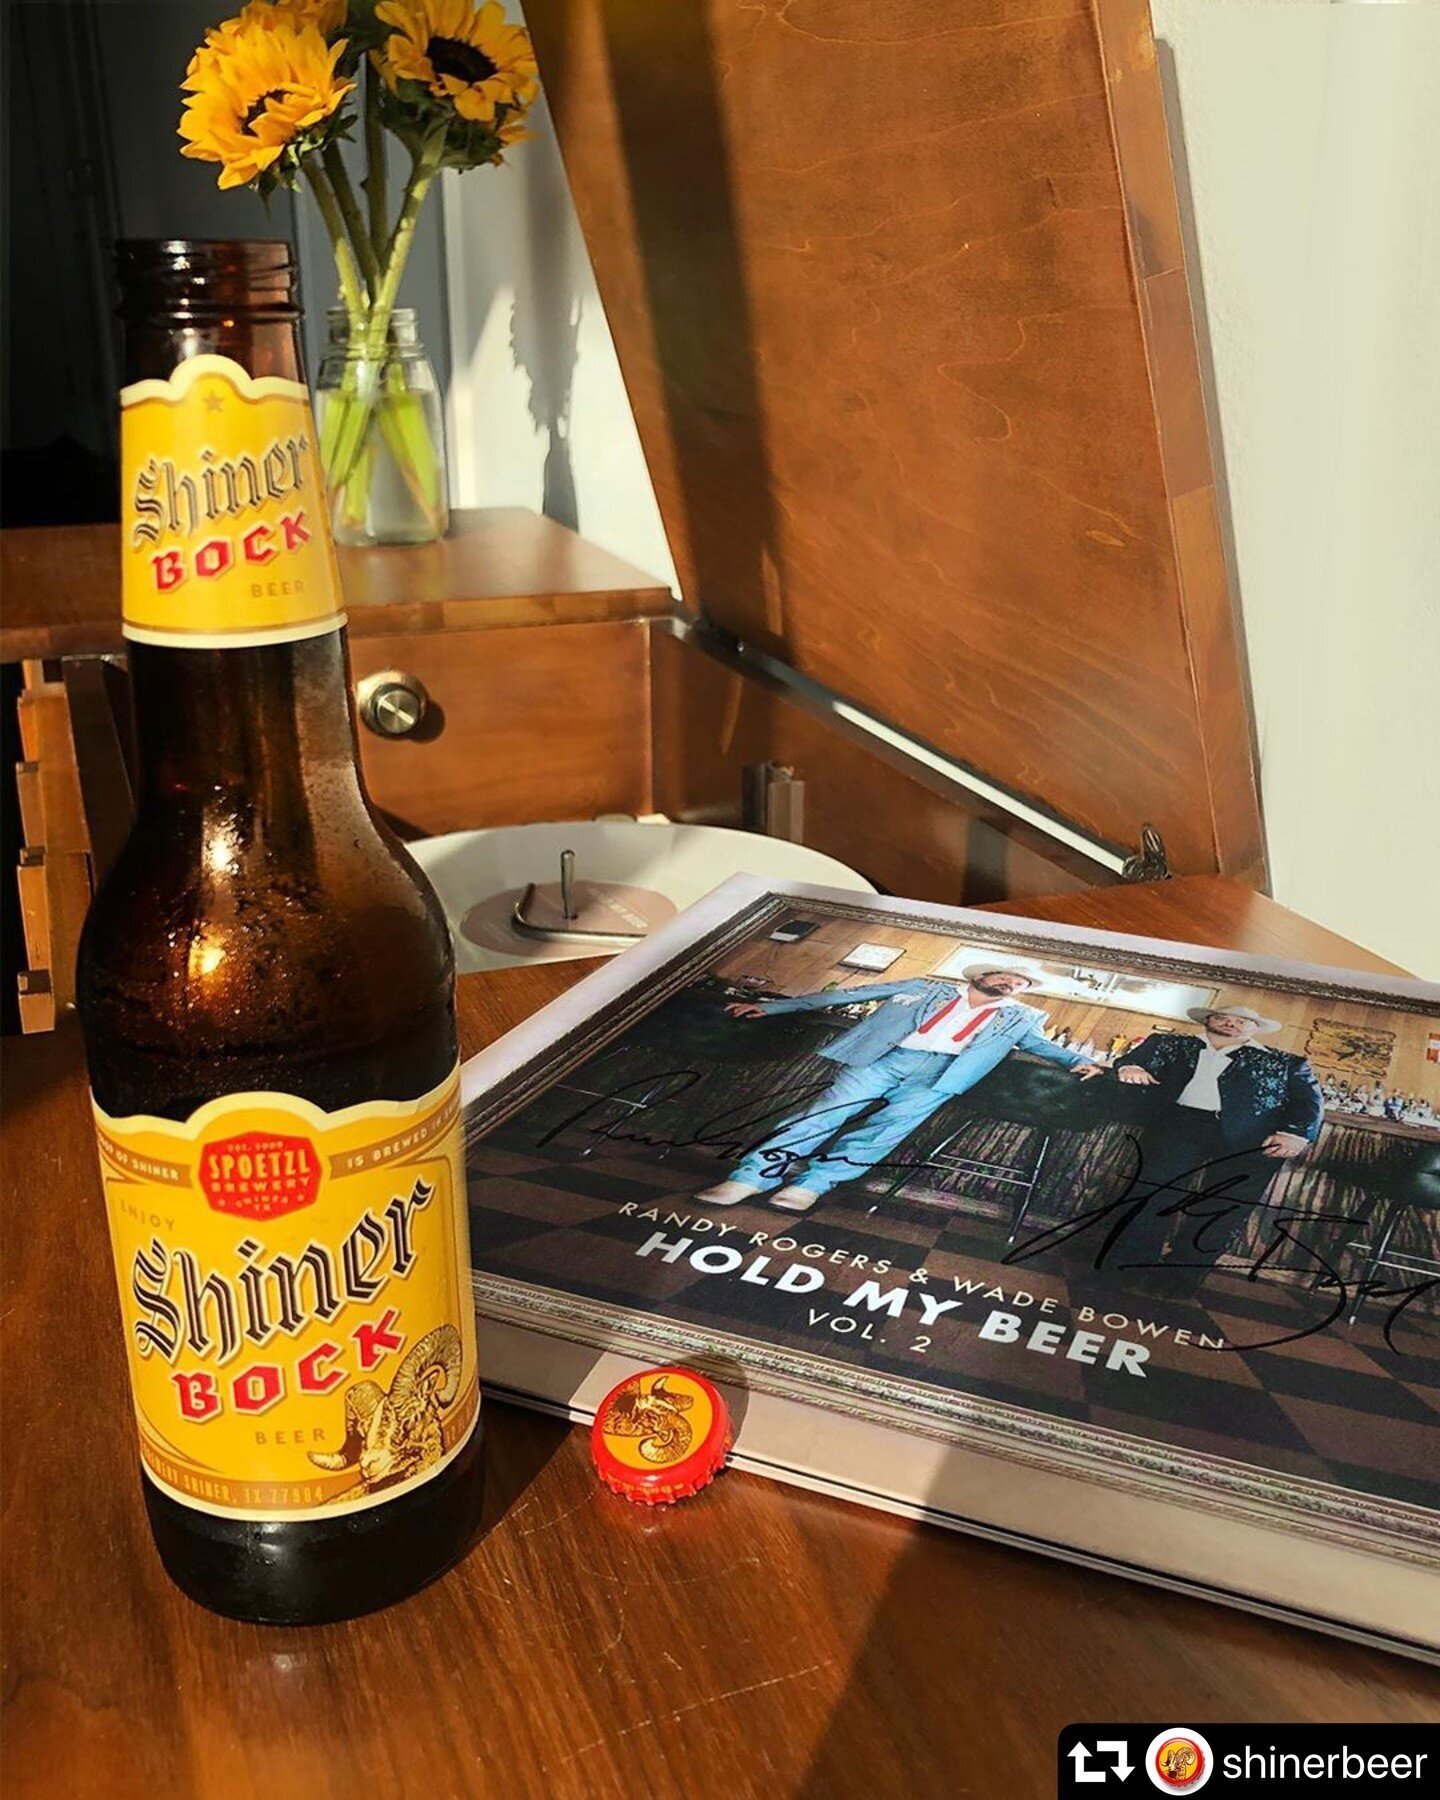 Hell yeah it does. #repost @shinerbeer ・・・ Shiner Bock just goes with country music, whether you&rsquo;re making it or listening to it. Get your own album signed by @RandyRogersBand and @WadeBowen. Link in bio.